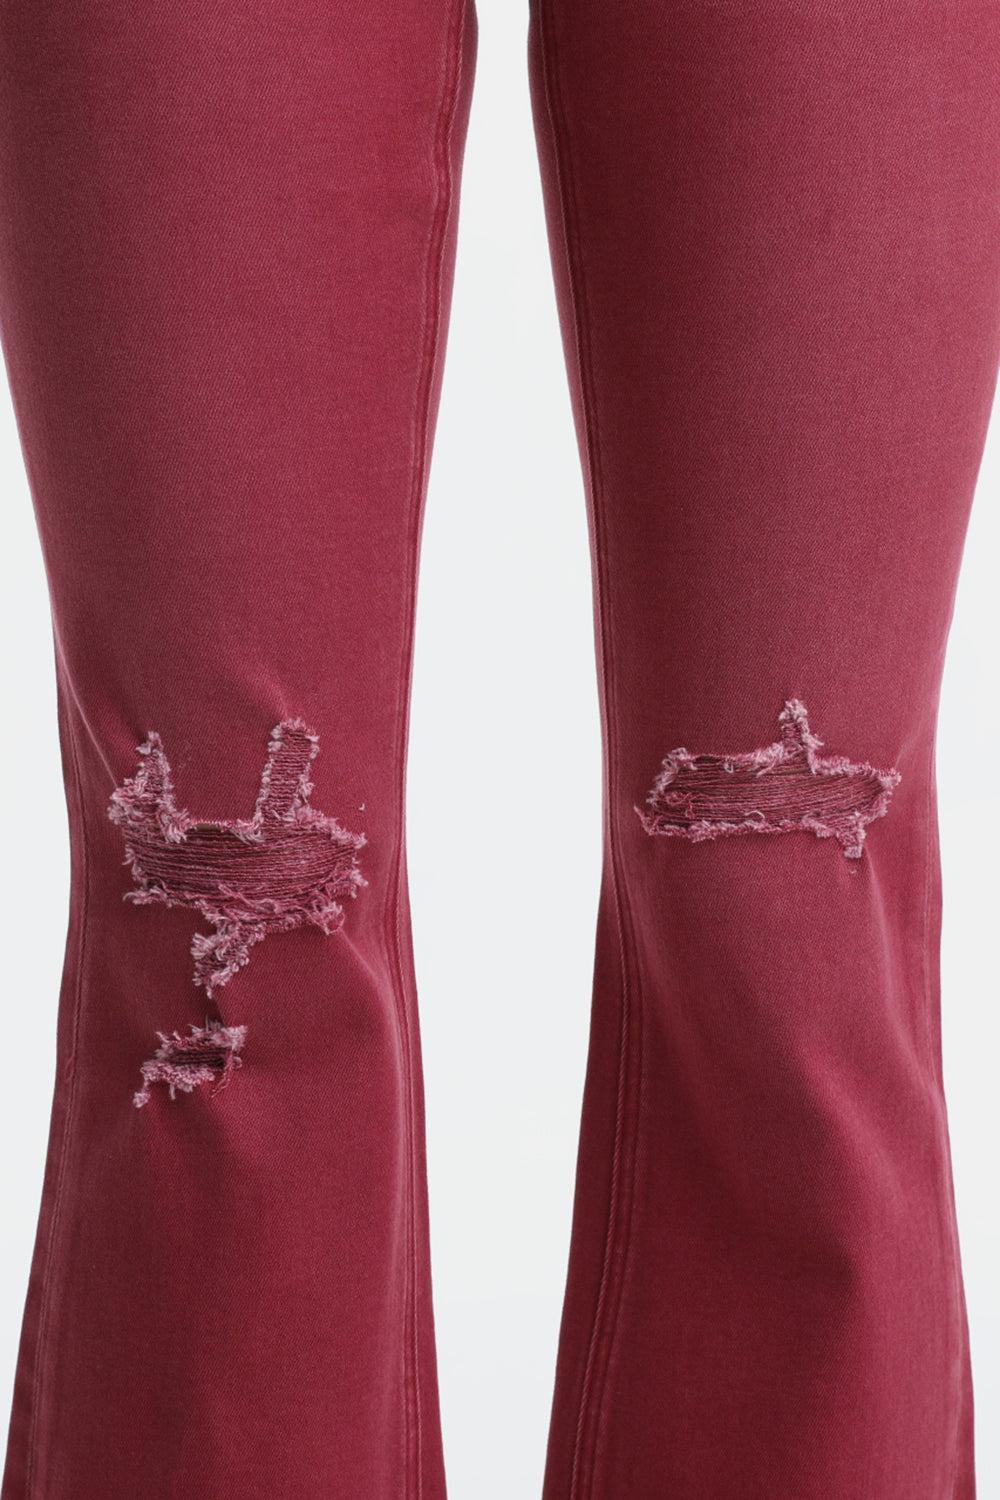 a pair of red jeans with a boat drawn on them